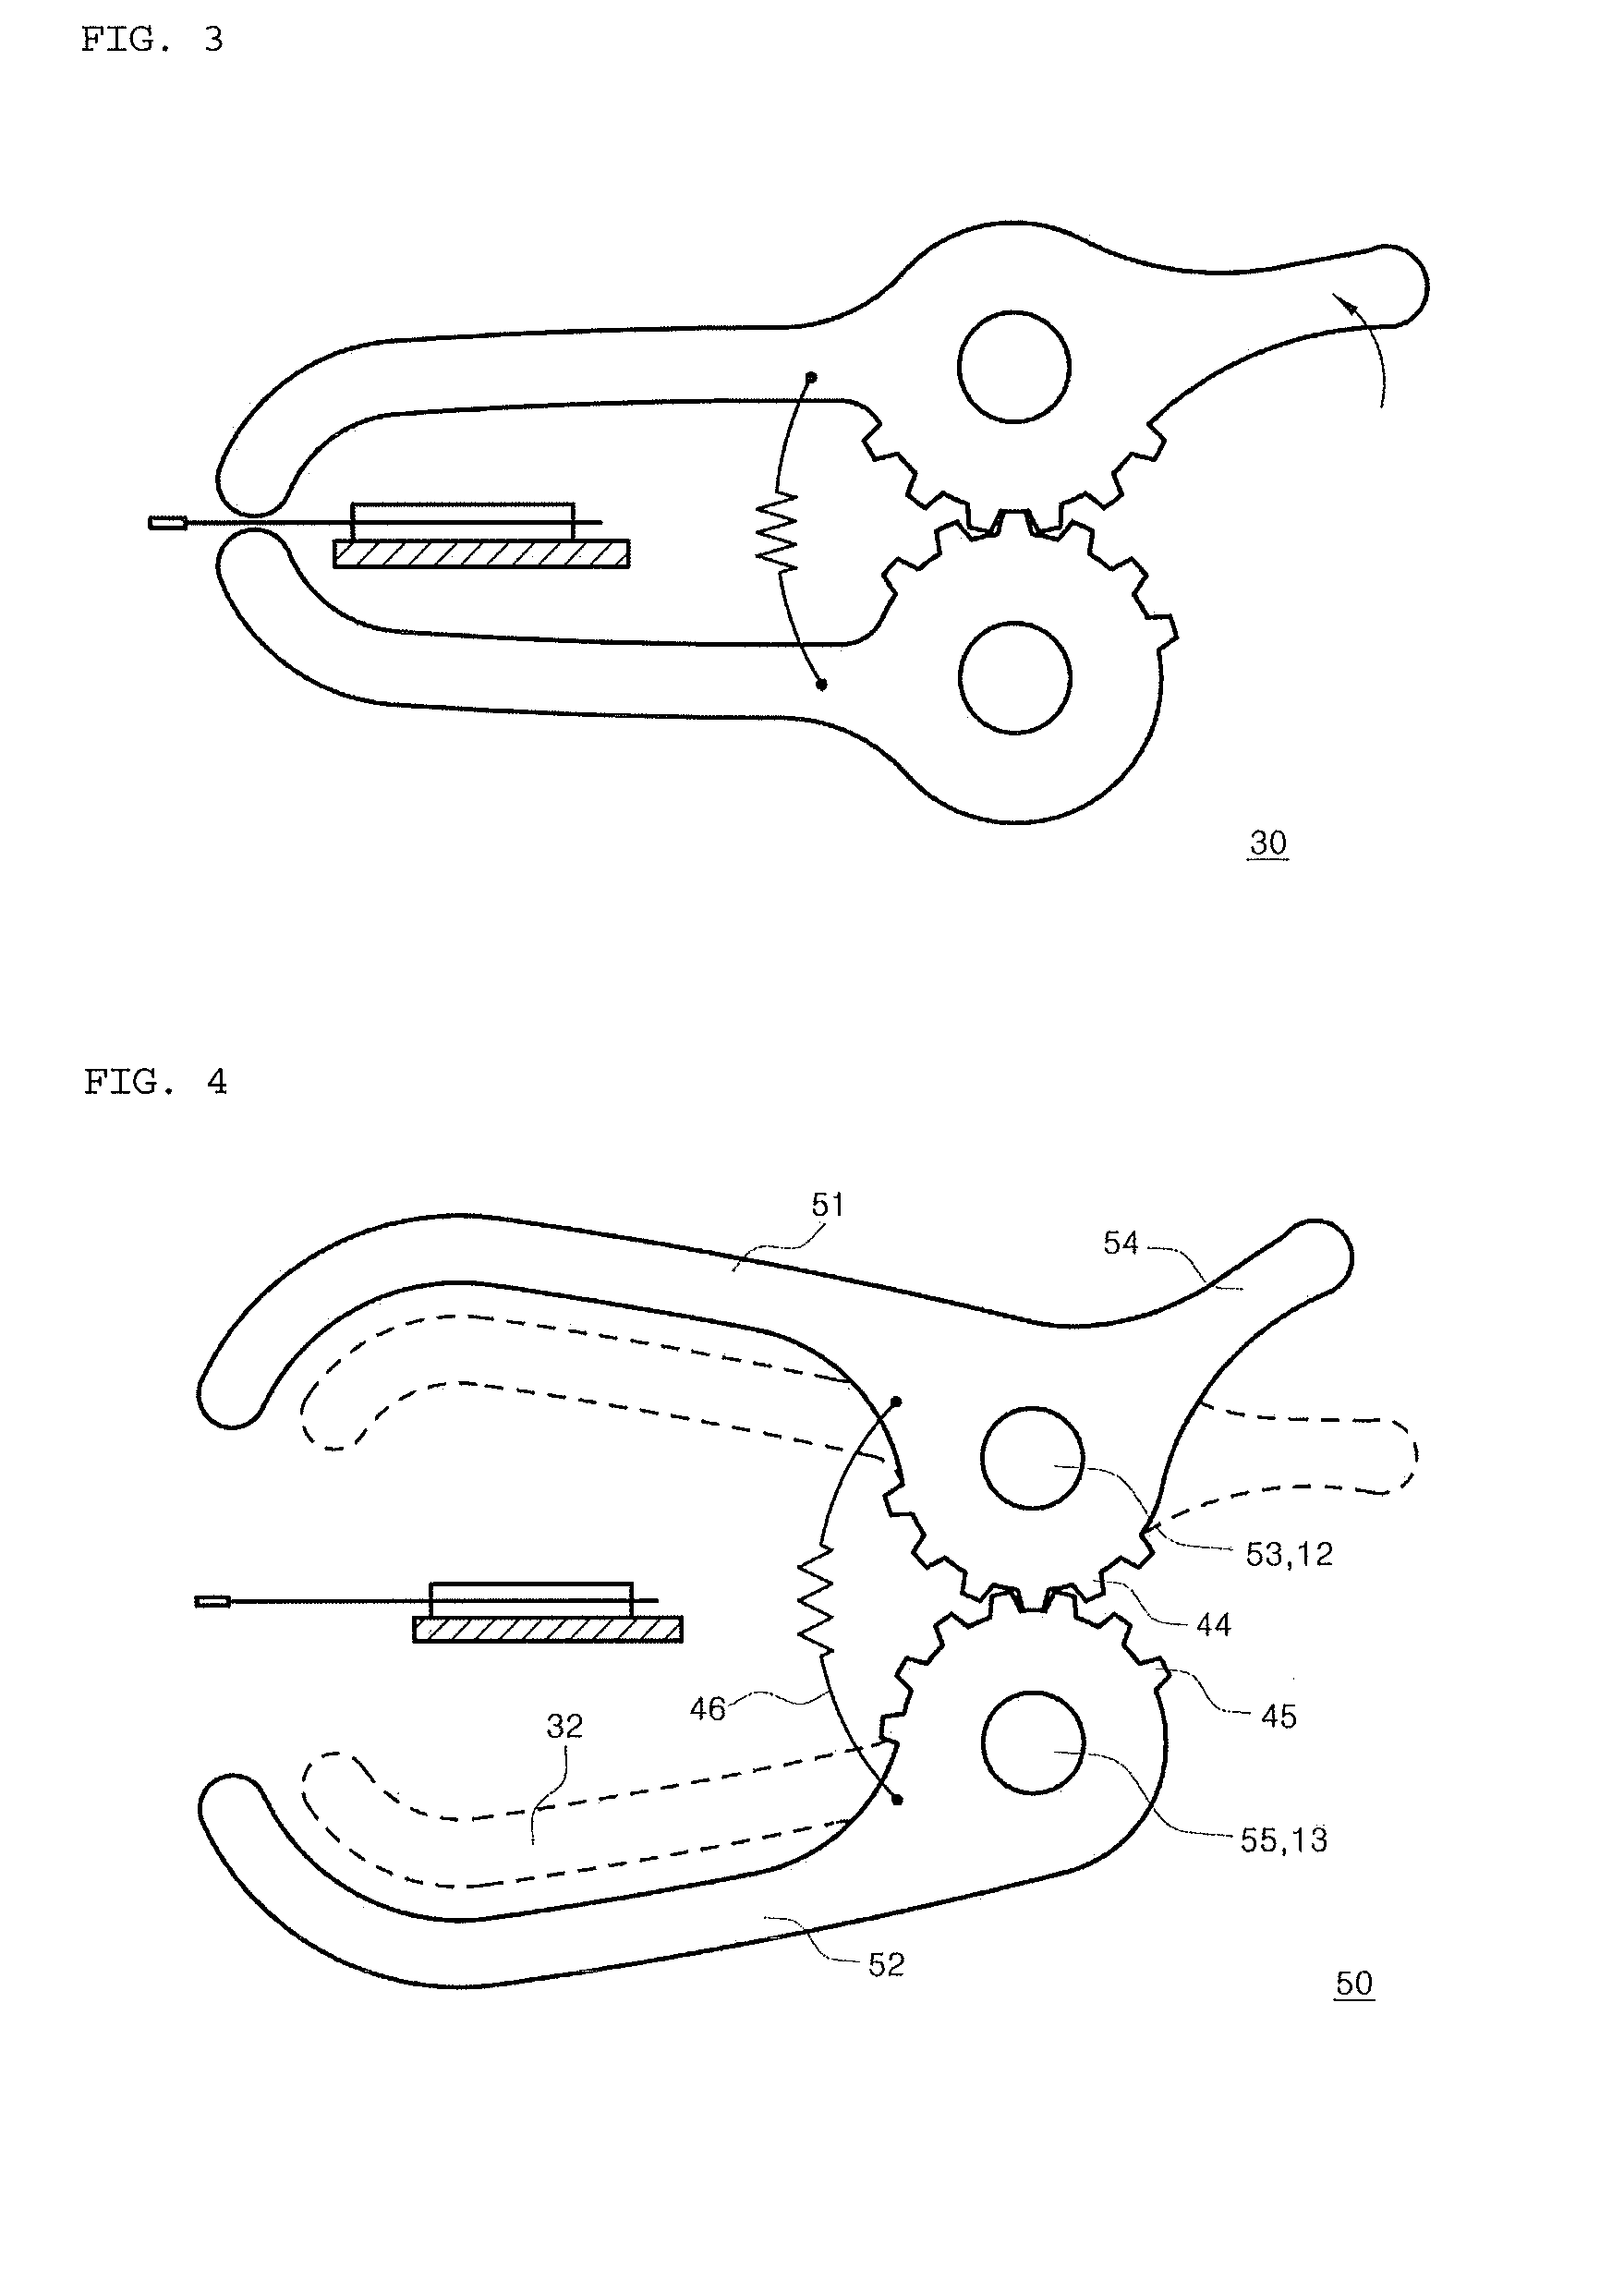 Attaching device for extension eyelashes